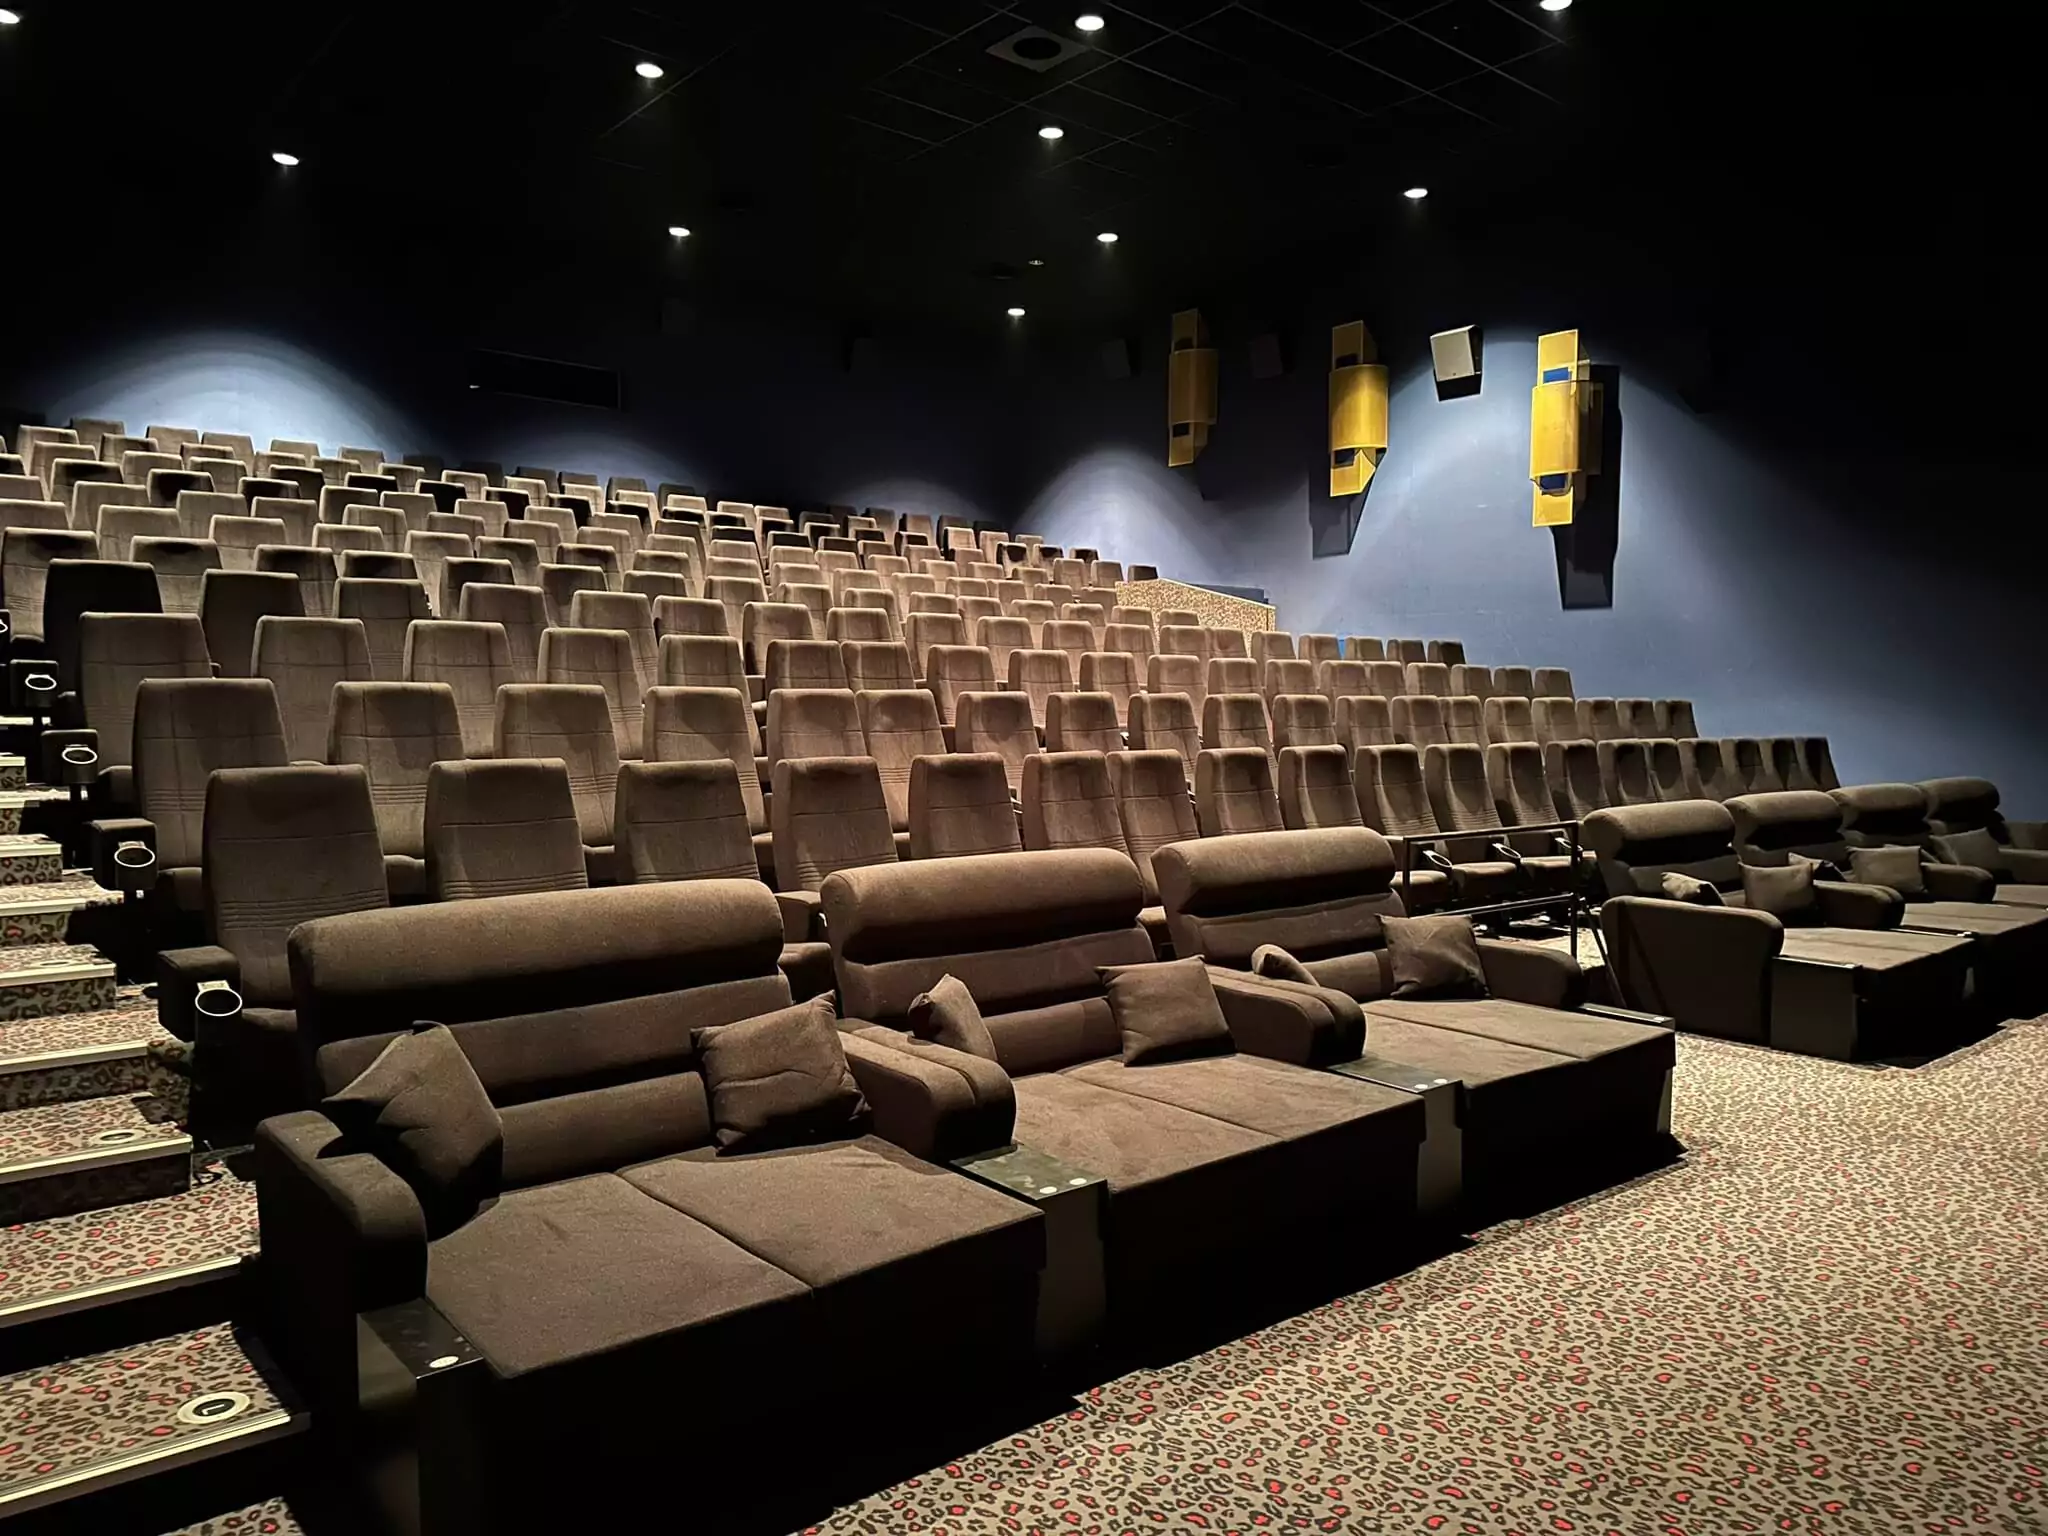 Simko Seating's Premier Movie Chairs